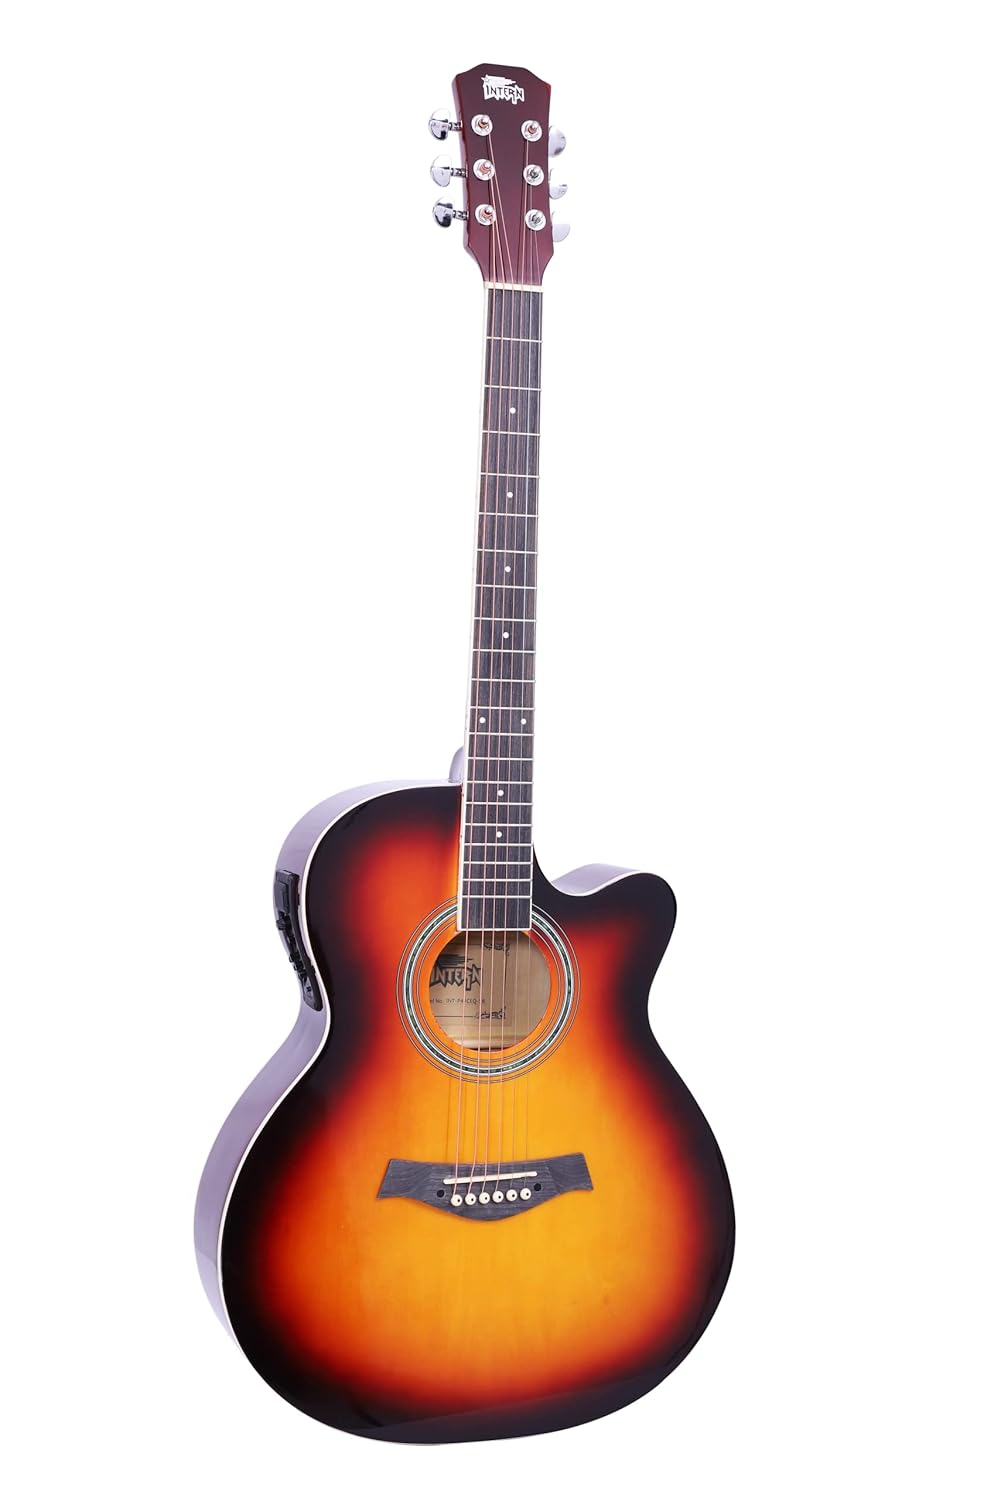 INTERN 40 inches Acoustic Guitar with Pick-up & truss rod, carry bag, strings pack, strap & picks. Premium Wooden durable built, Best tonal stability with professional sound amplificaiton. (Sunburst).